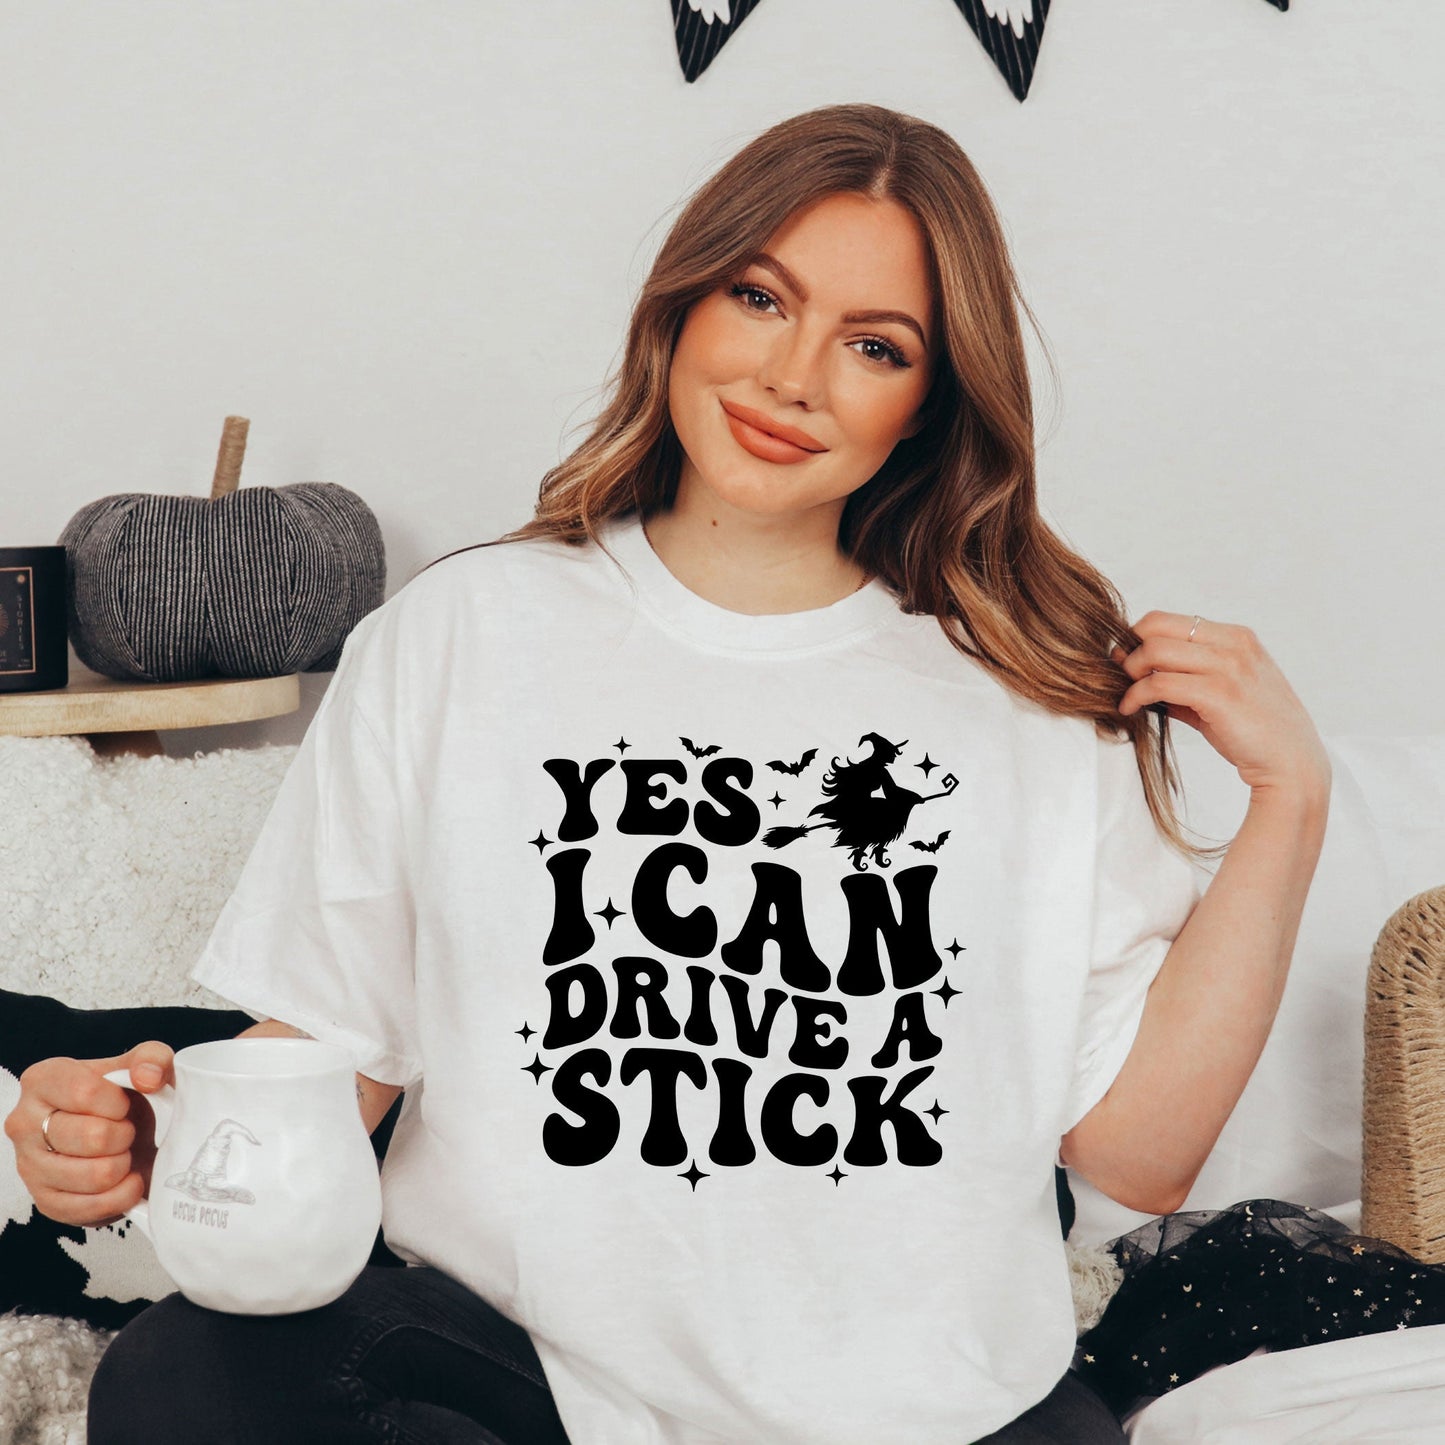 Clearance Yes I Can Drive A Stick | Garment Dyed Tee